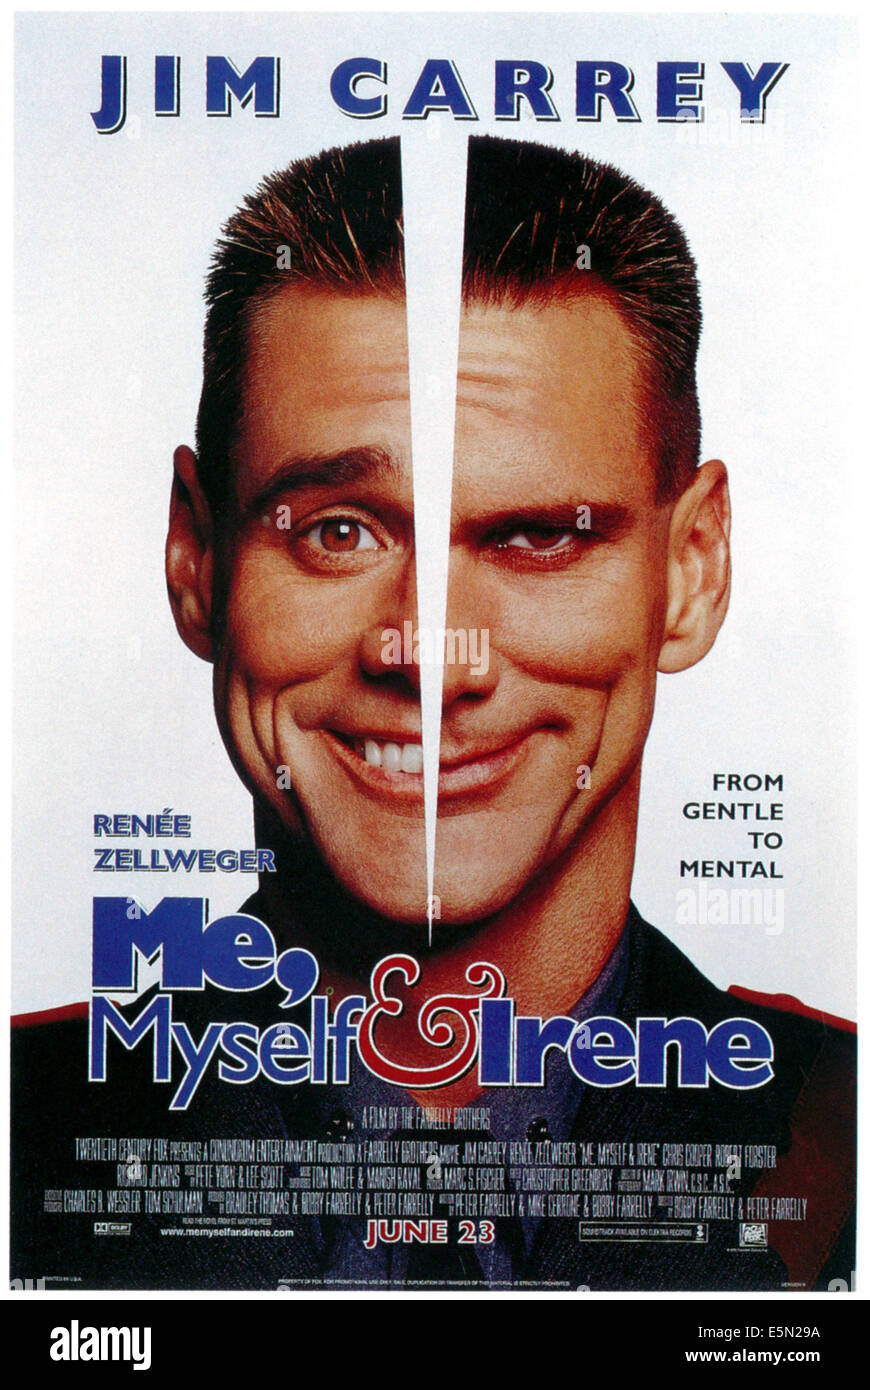 ME, MYSELF & IRENE, Jim Carrey, 2000, ©20th Century Fox Film Corp. All rights reserved./courtesy Everett Collection Stock Photo